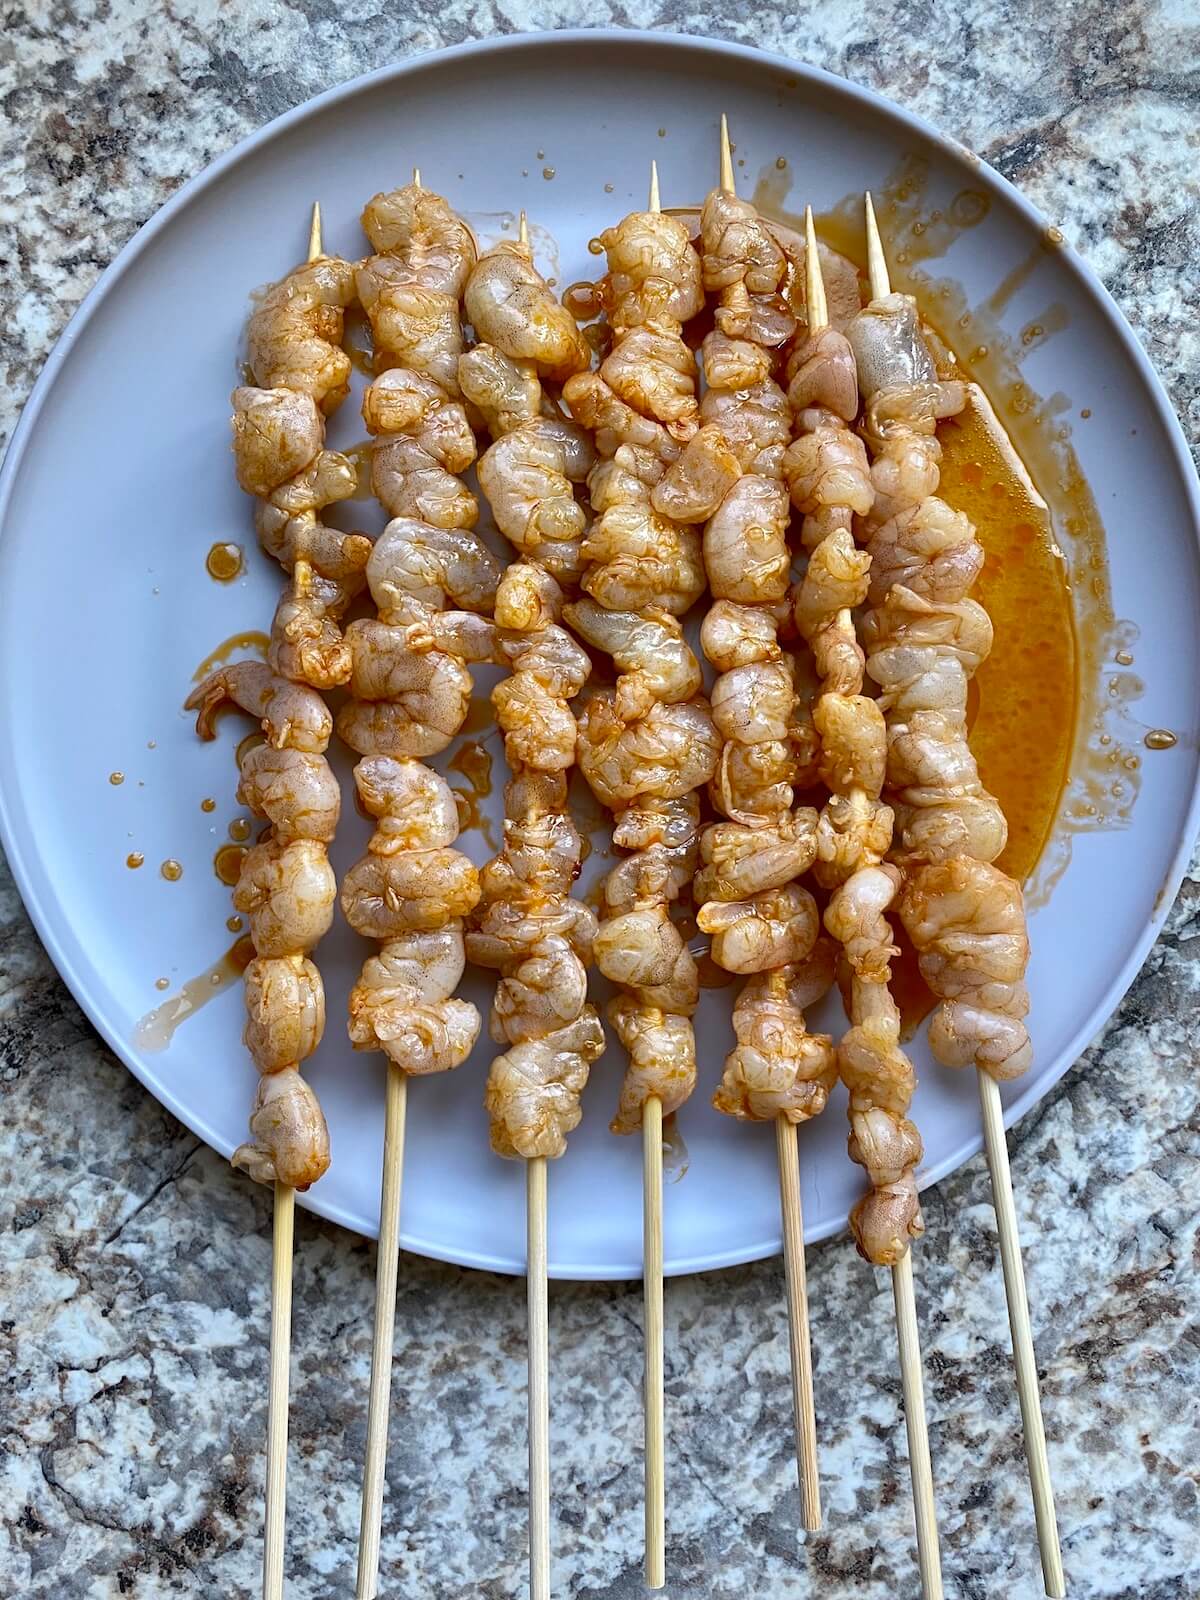 Seven skewers of marinated, raw shrimp on a gray plate.